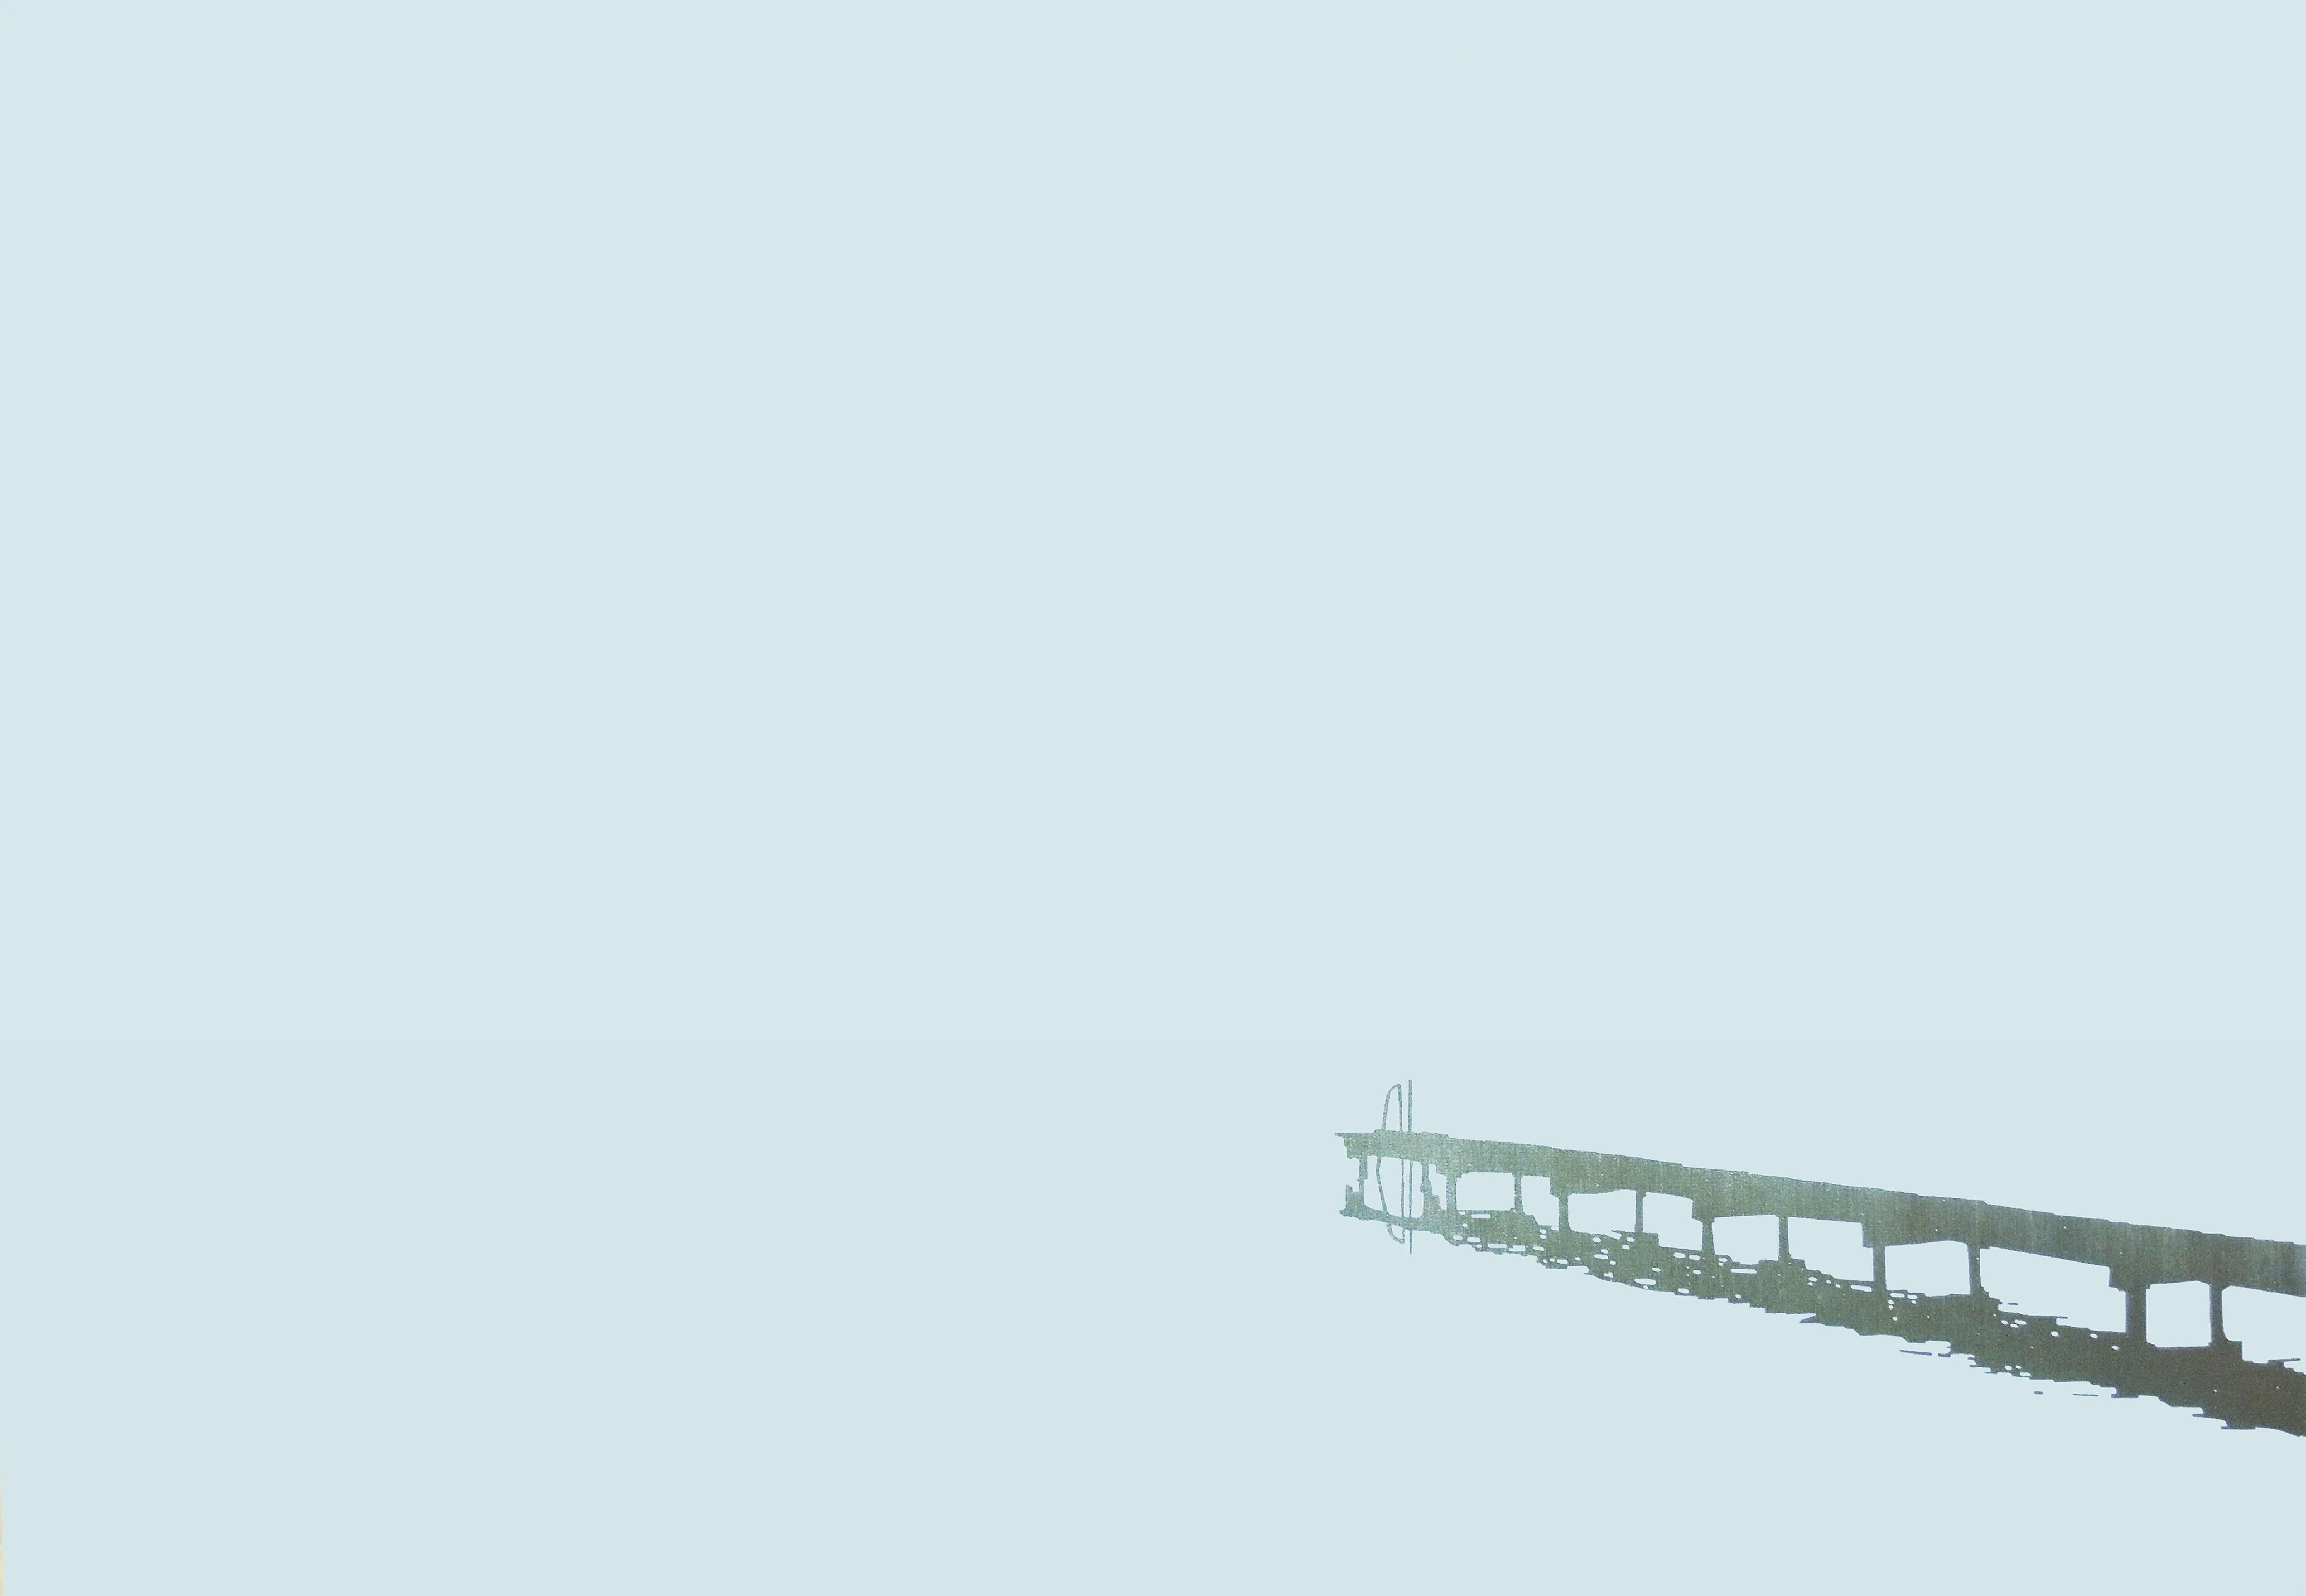 Jetty 16 February 09:43, Modern Landscape  Painting, Minimalistic, Abstract